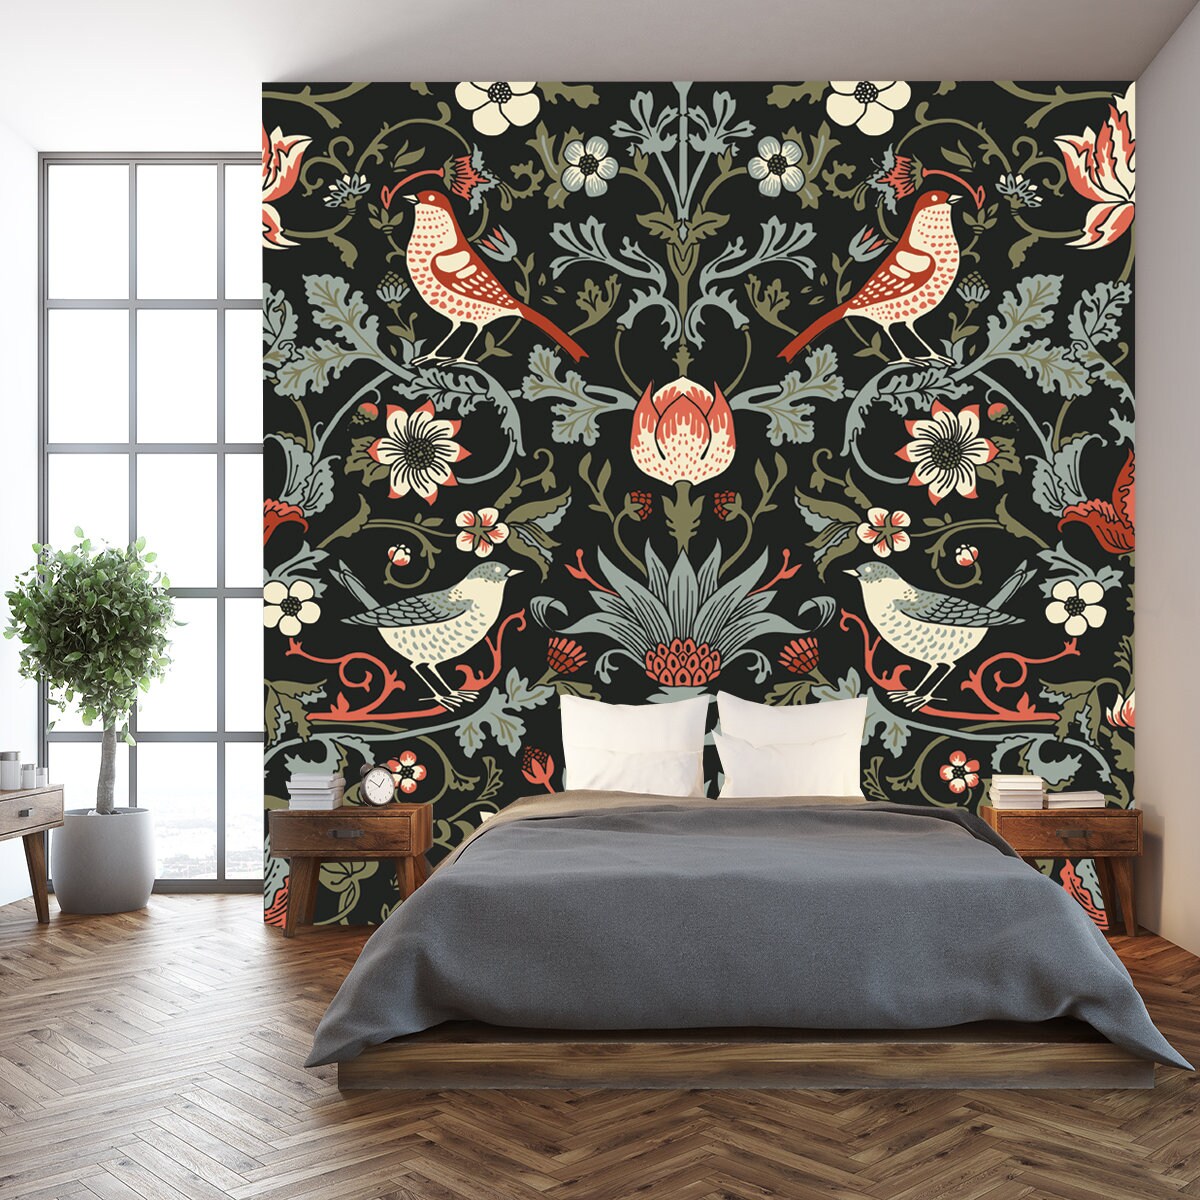 Dark Enchanted Vintage Flowers and Birds Seamless Pattern Vector. Magic Forest Background Wallpaper Bedroom Mural